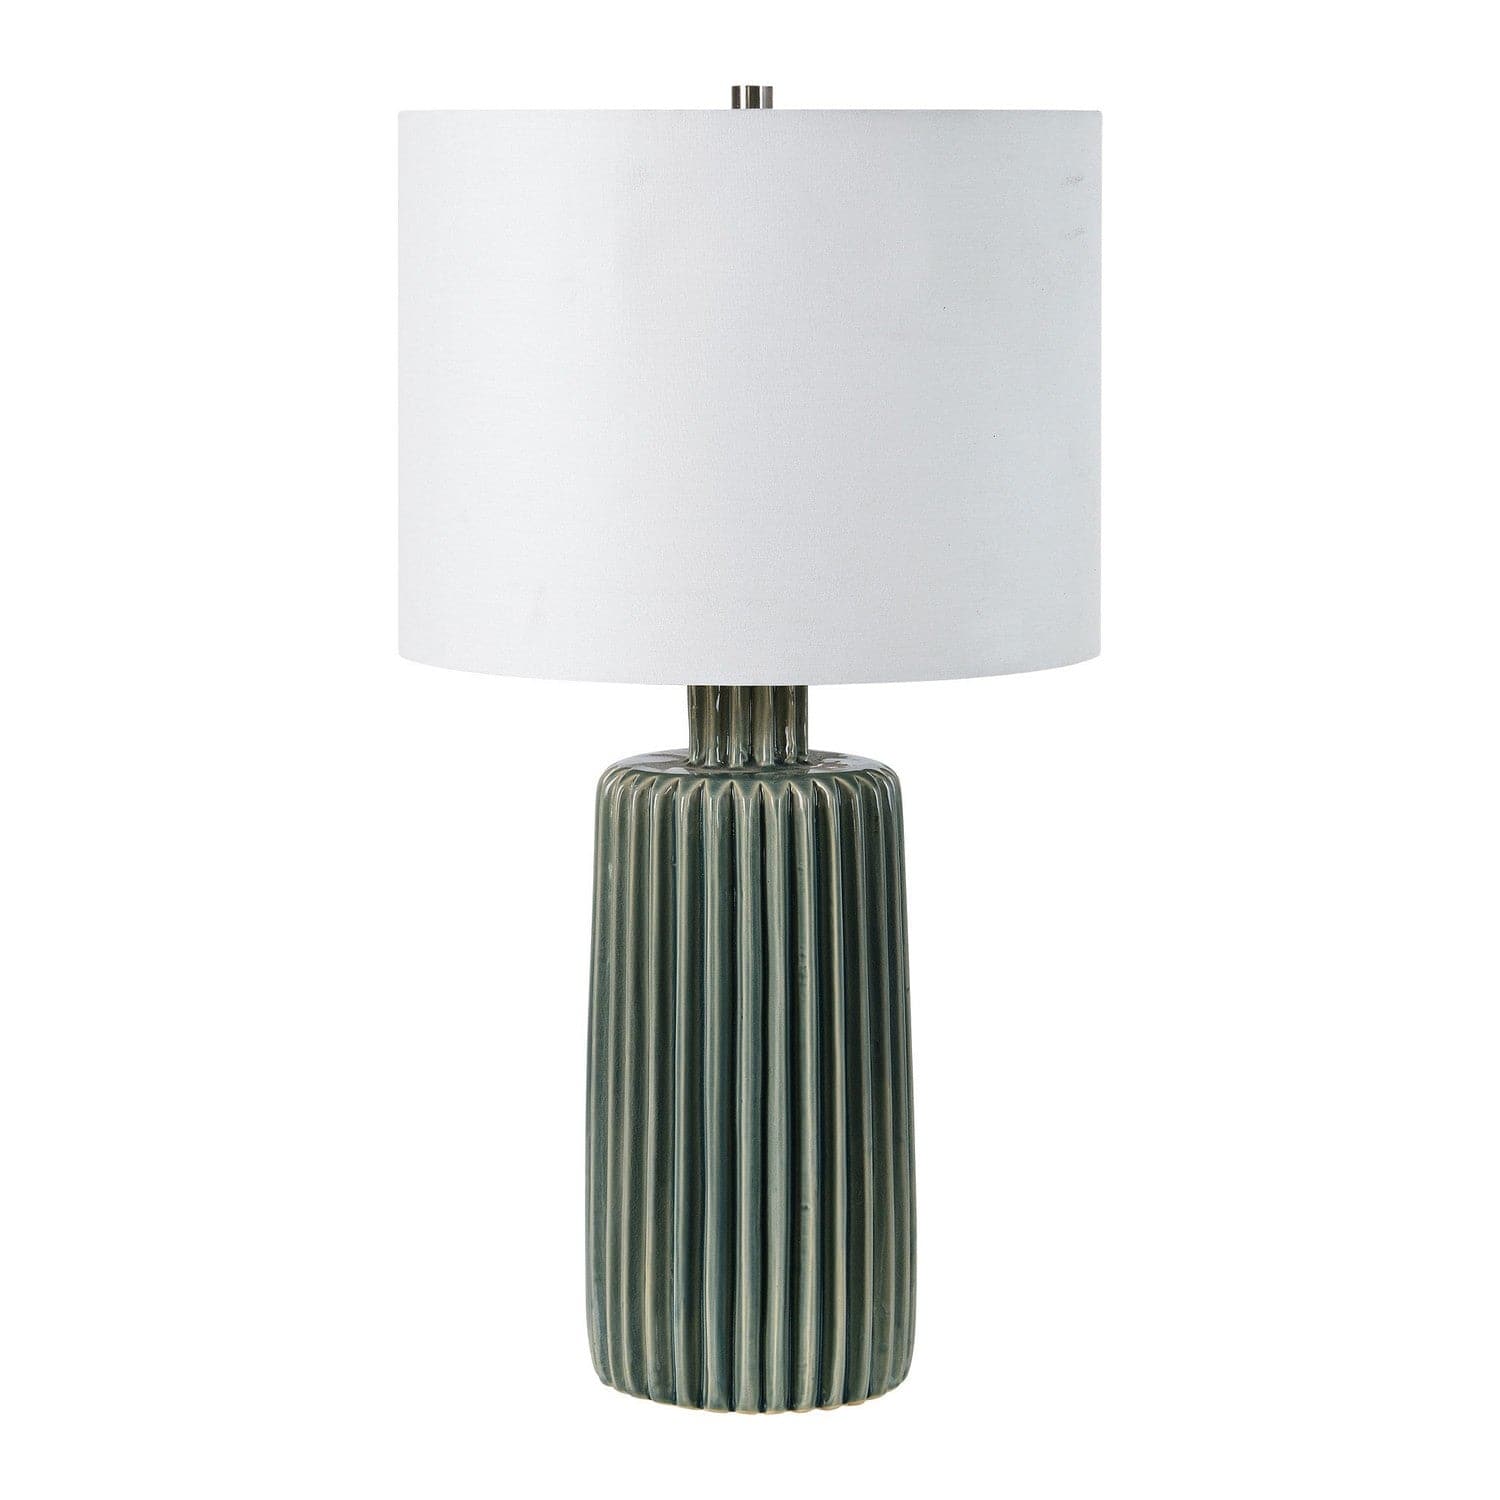 Renwil - LPT1228 - One Light Table Lamp - Roza - Olive